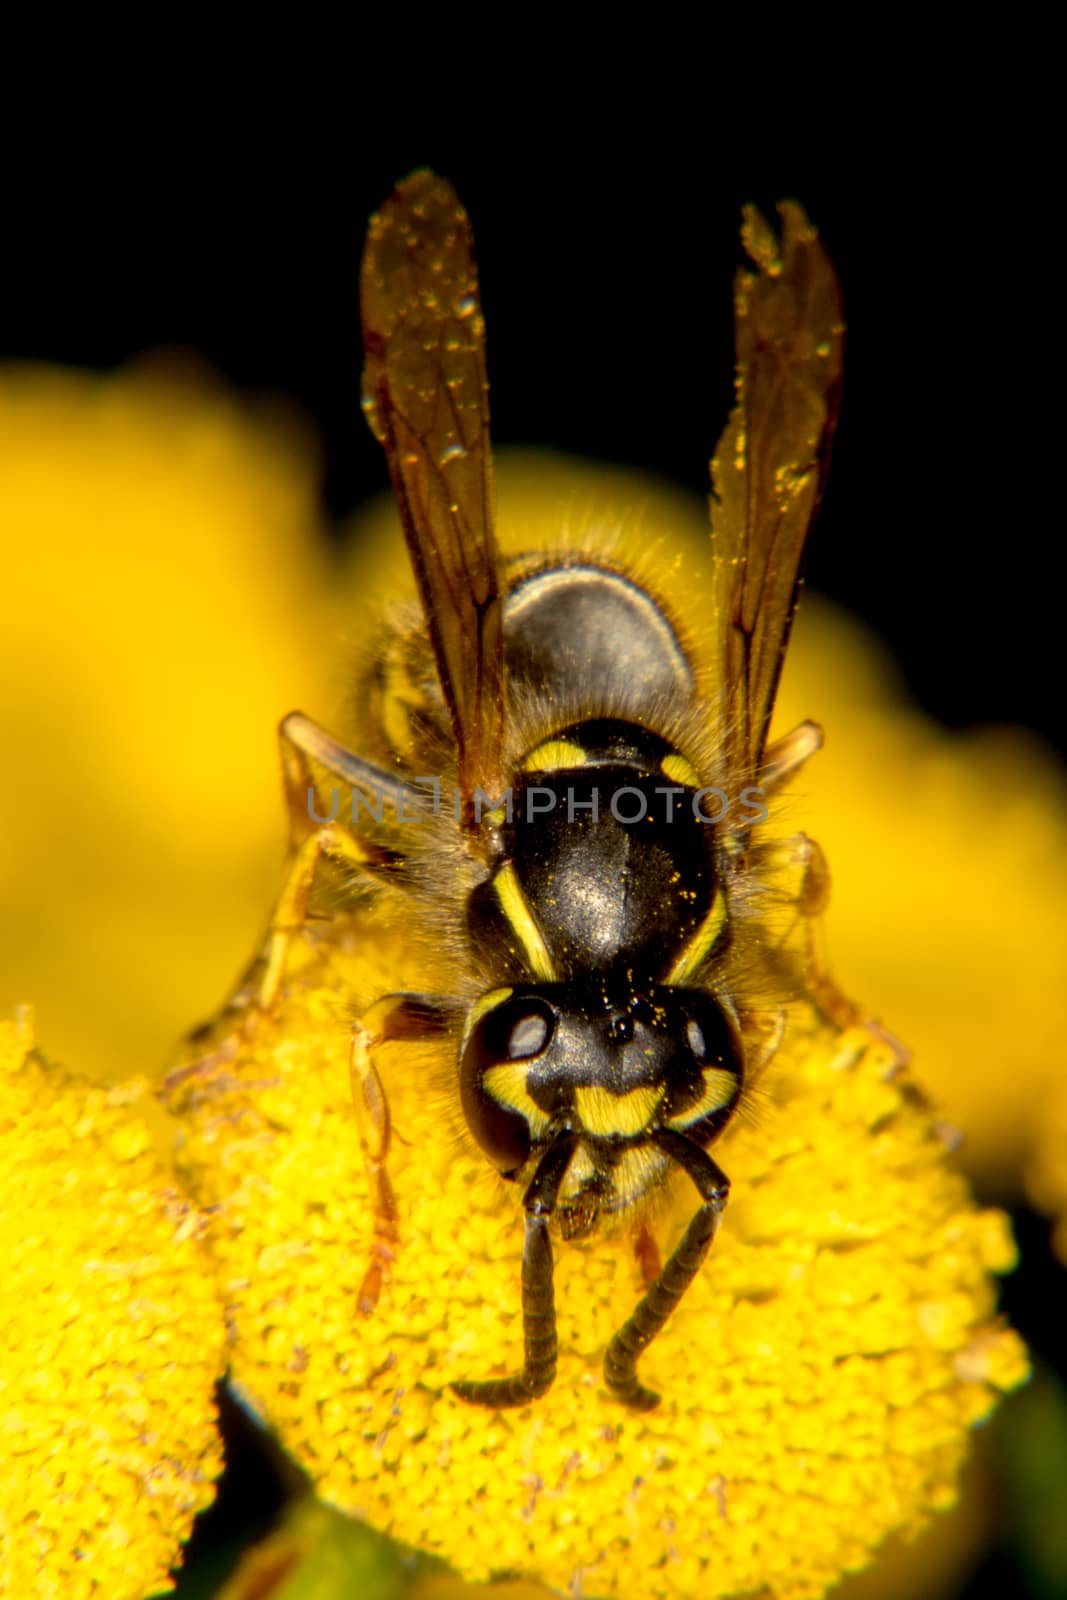 Black and yellow coloration of a wasp by thomas_males